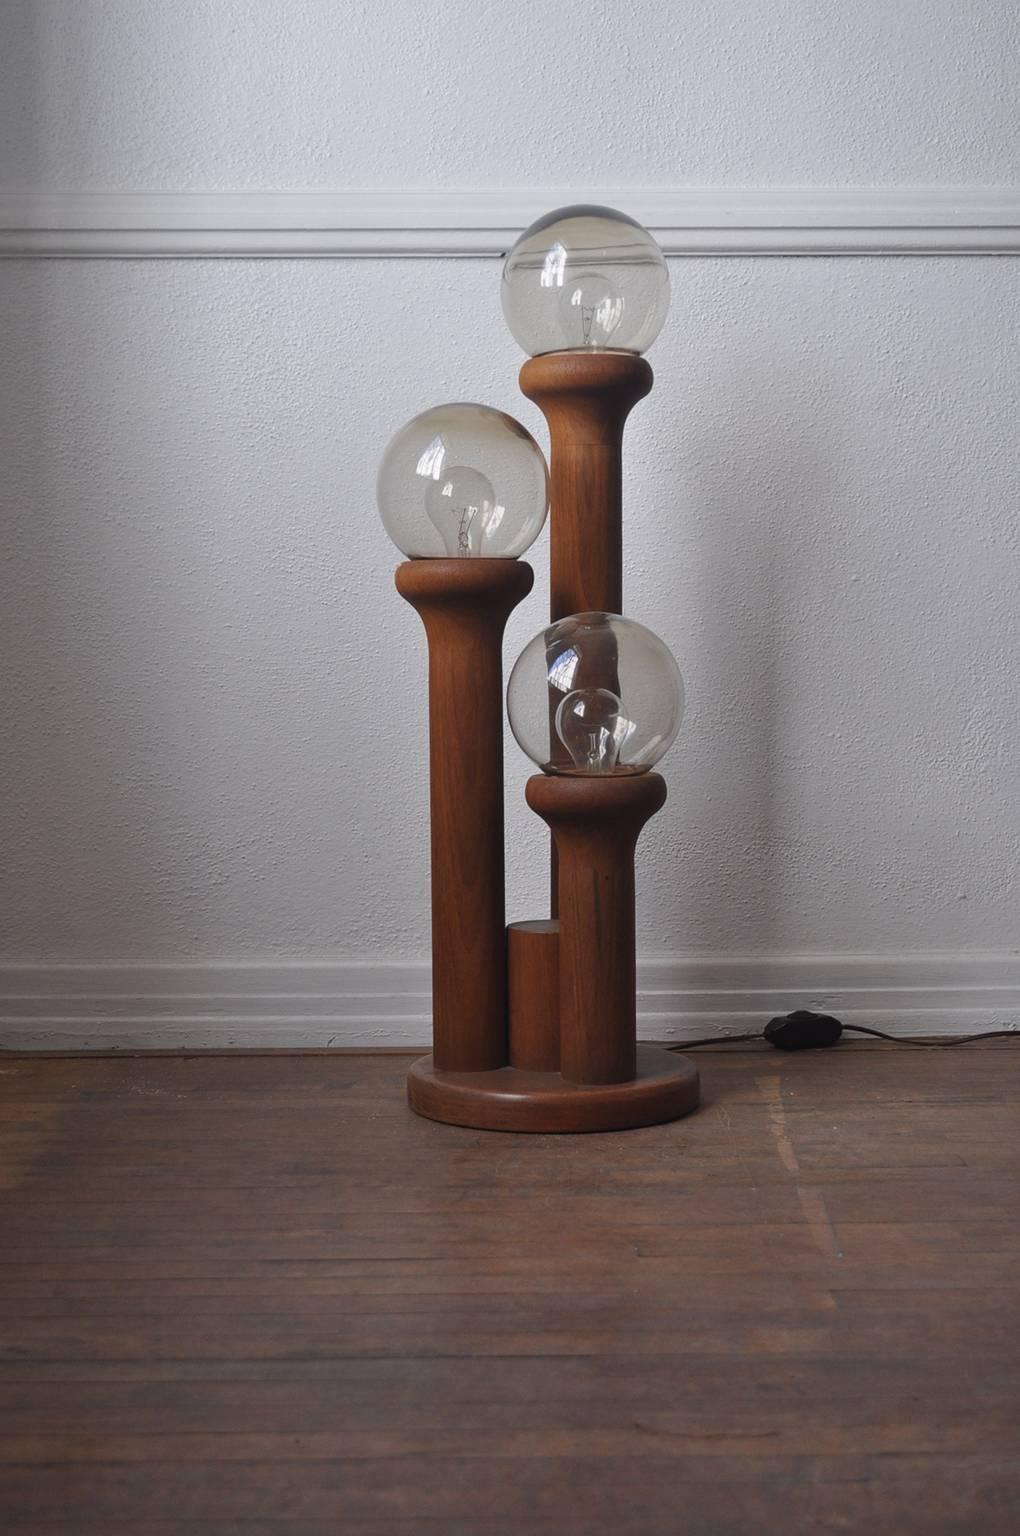 1970s solid walnut lamp with sculpted details and glass globe shades. Glass shades can be removed.